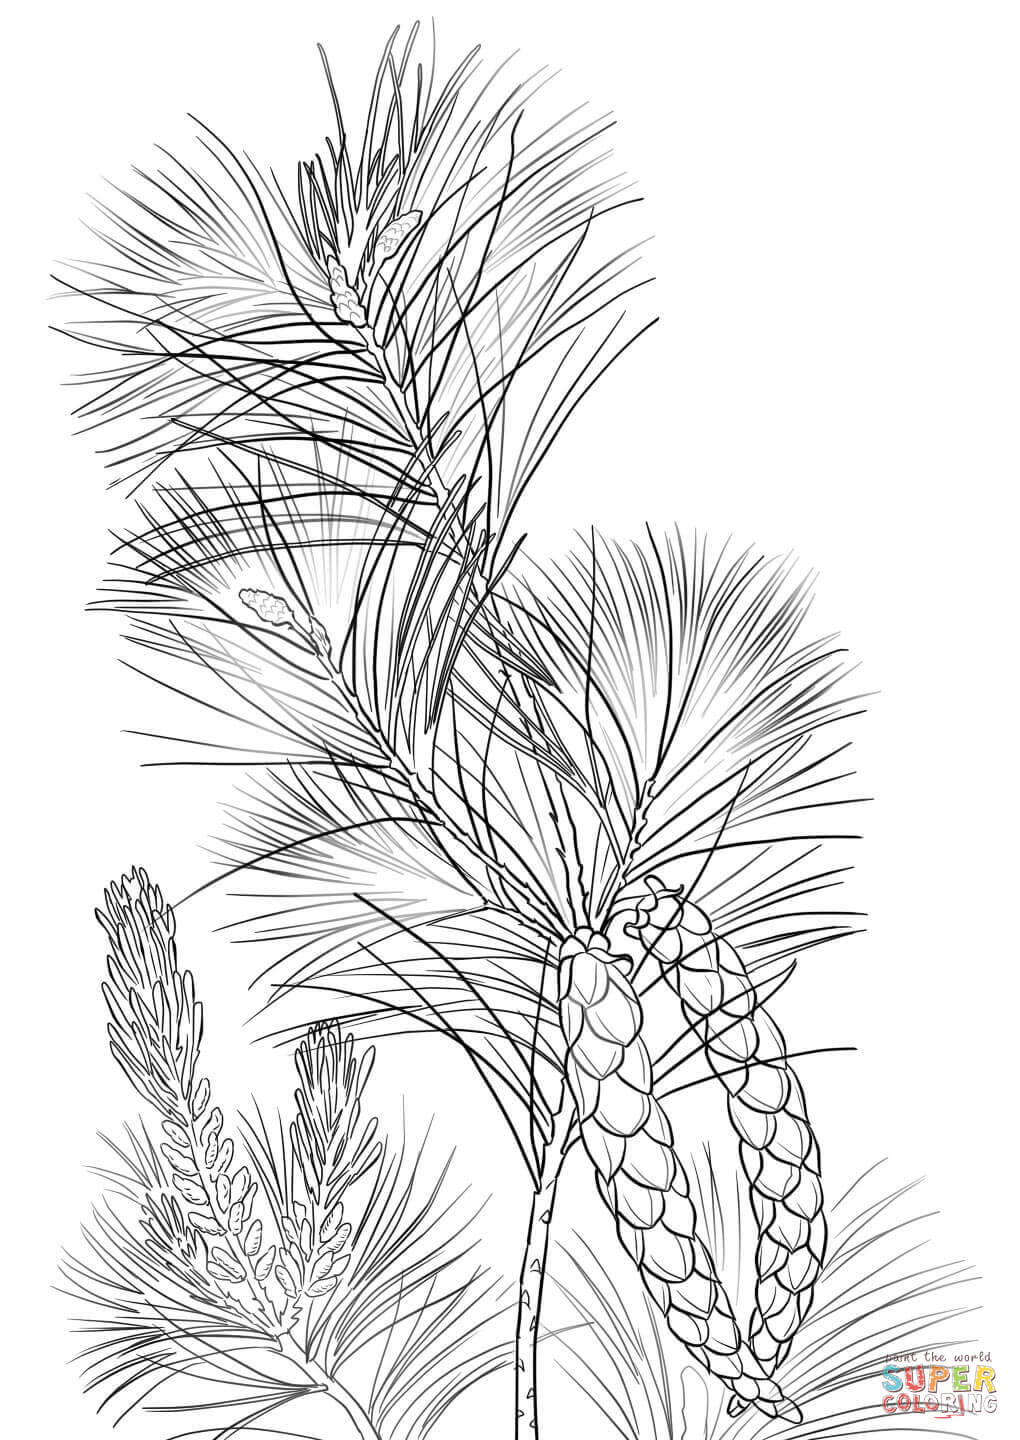 White pine cone and tassel coloring page free printable coloring pages